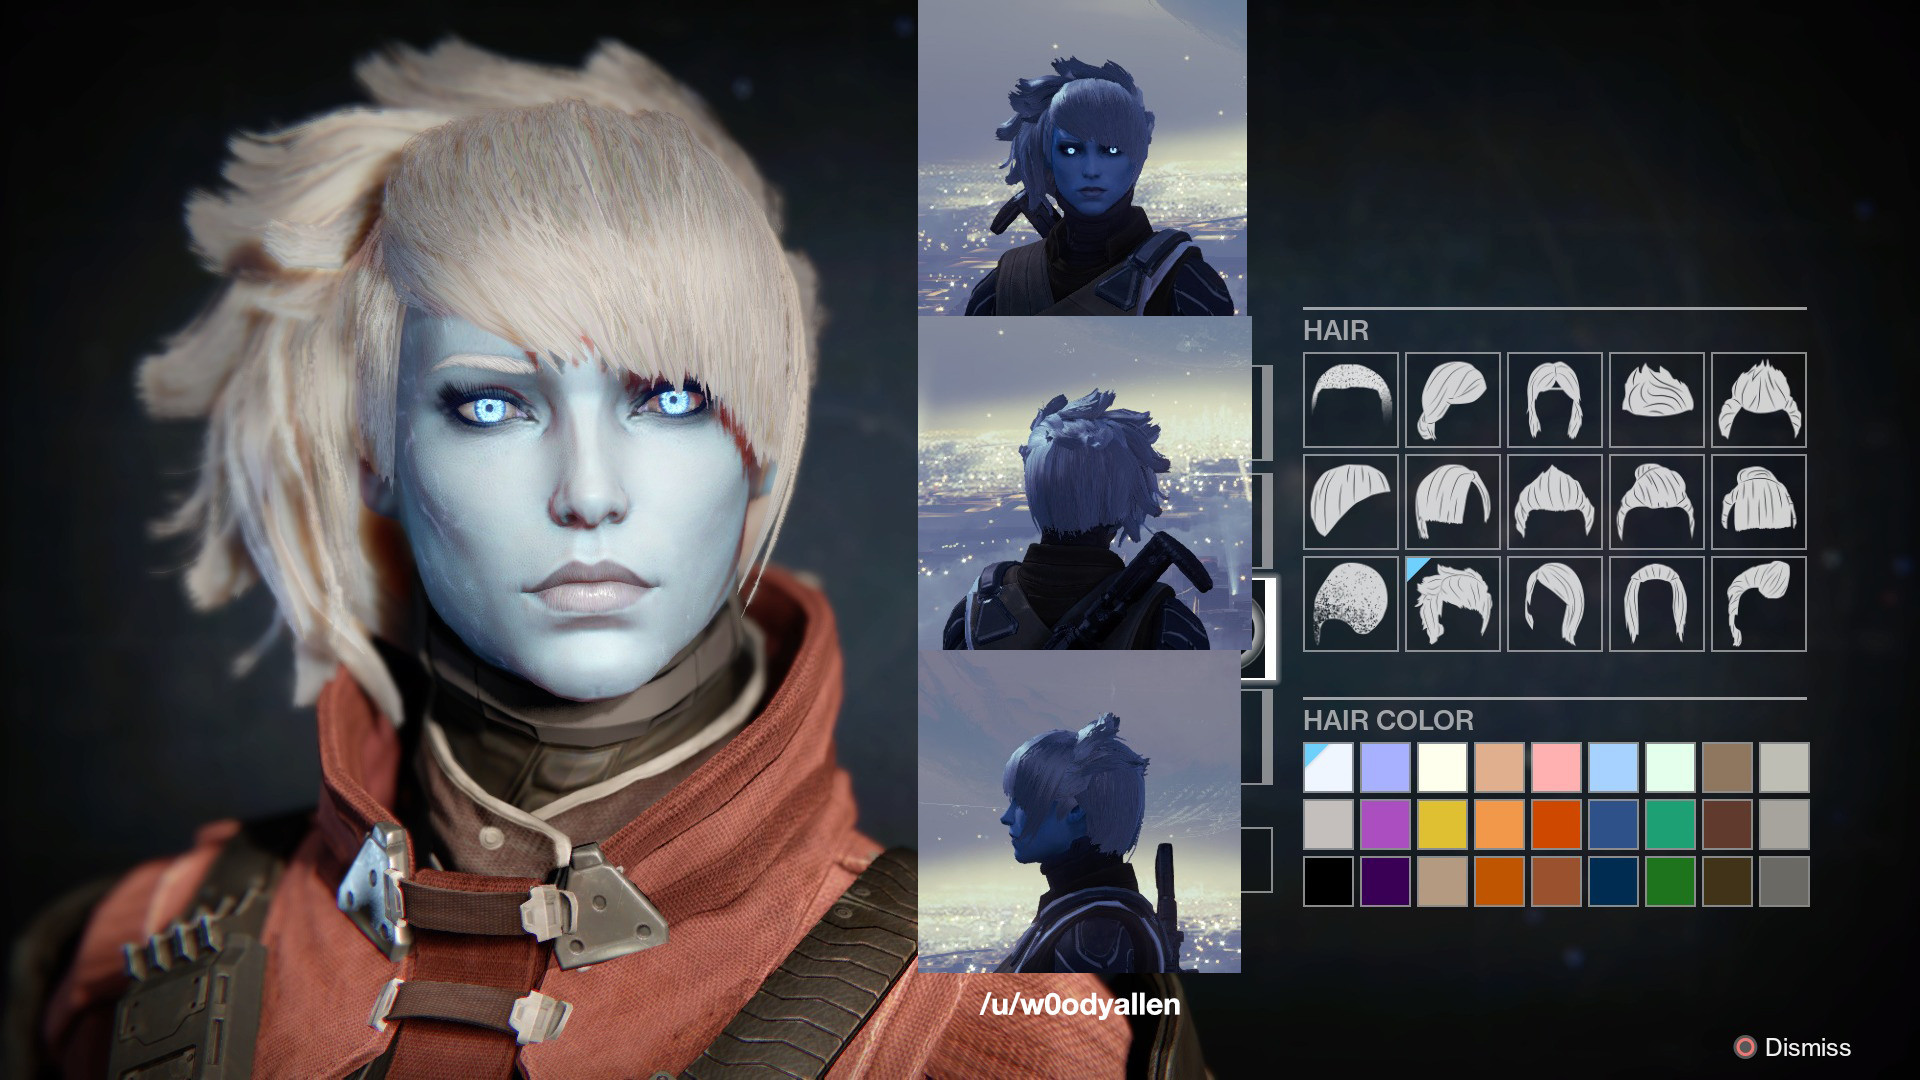 Destiny Human Female Hairstyles From Behind
 Destiny Awoken Female Hairstyles what your hair looks